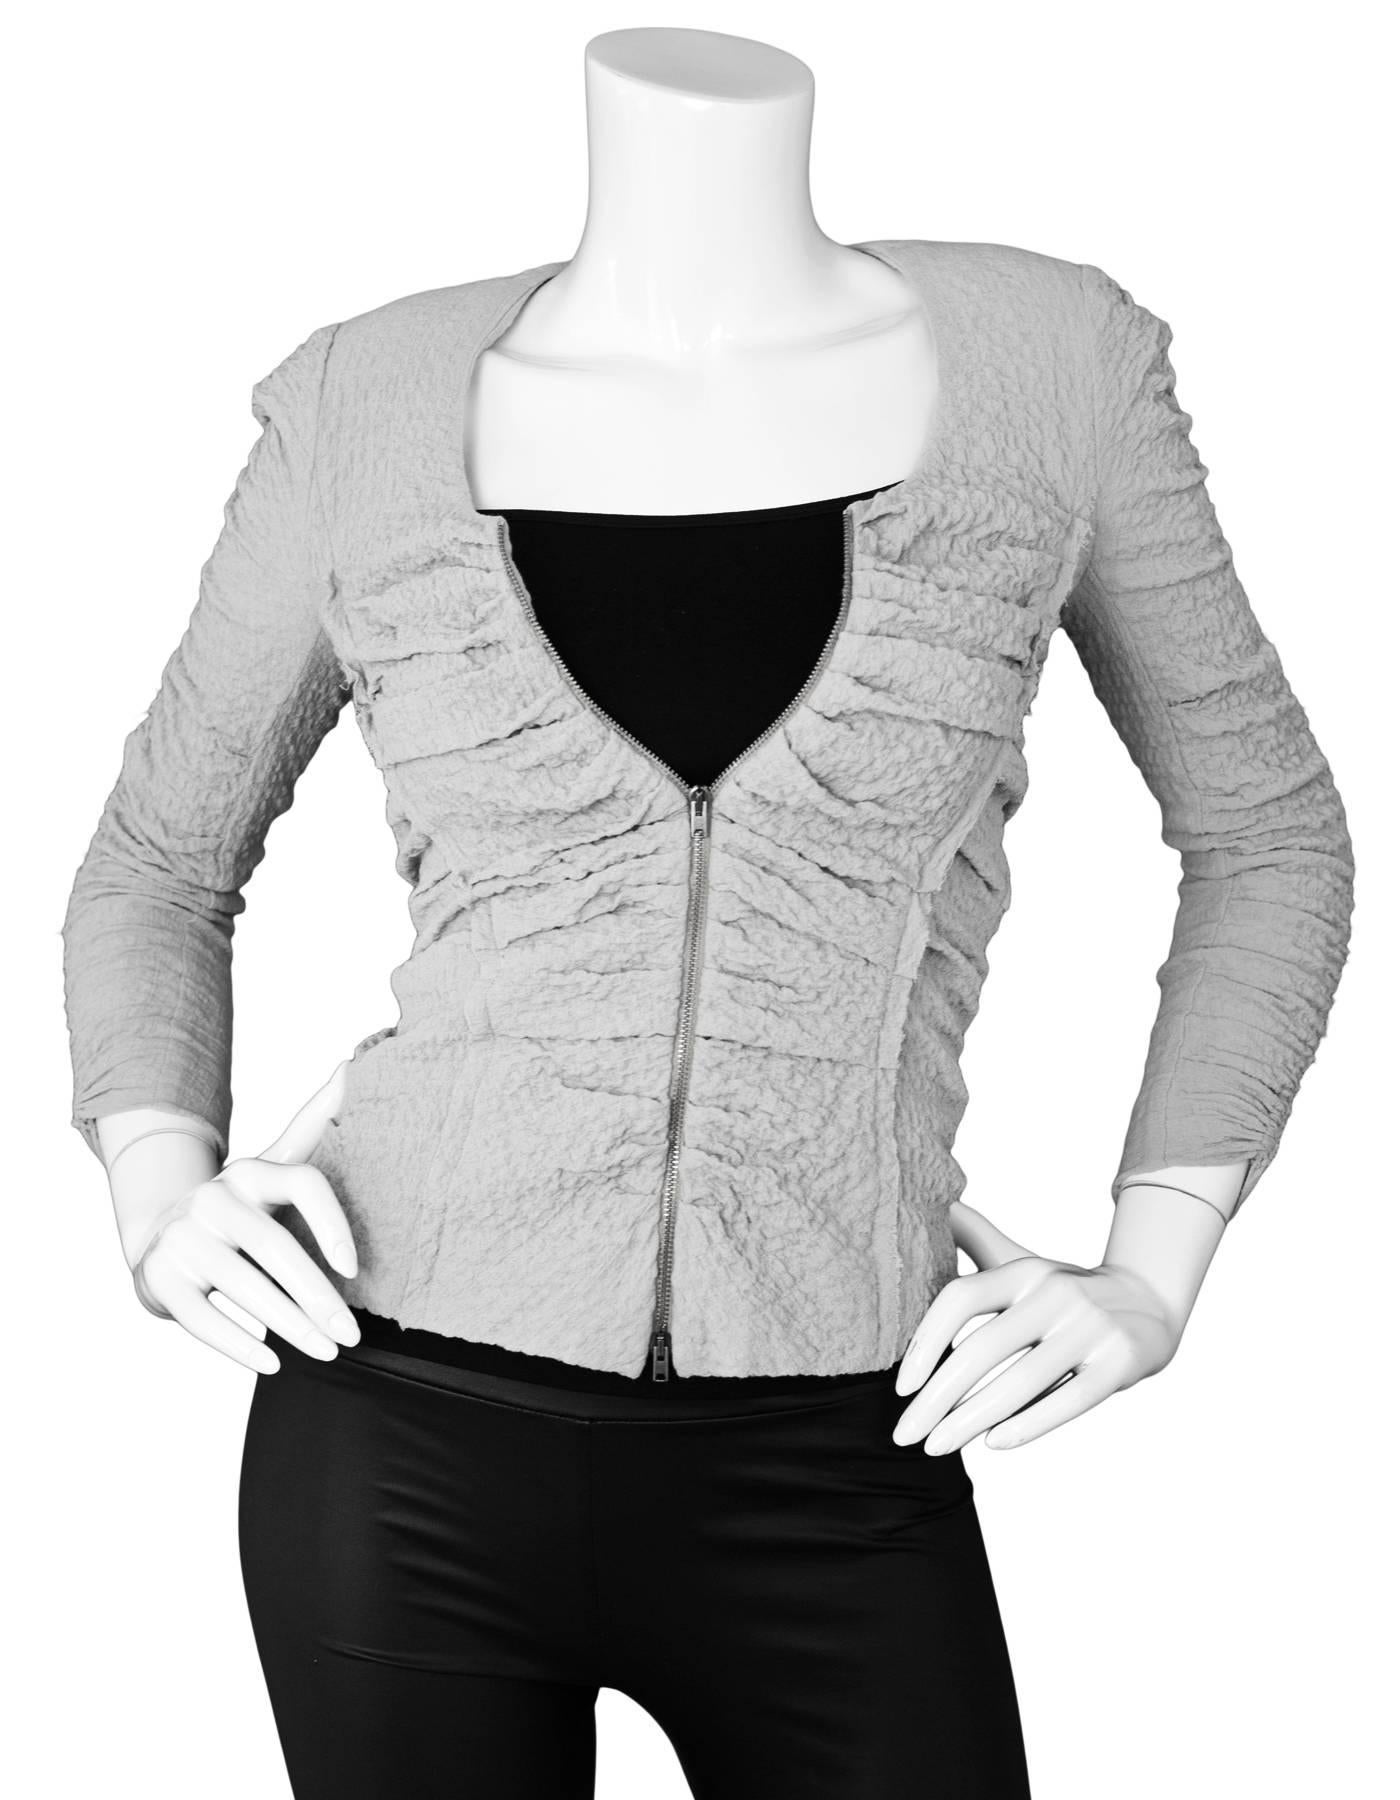 Isabel Marant Grey Crepe Ruched Jacket Sz Small

Made In: Slovakia
Color: Grey
Composition: 68% Viscose, 31% wool, 1% elastane
Lining: None
Closure/Opening: Front double zip closure
Exterior Pockets: None
Interior Pockets: None
Overall Condition: